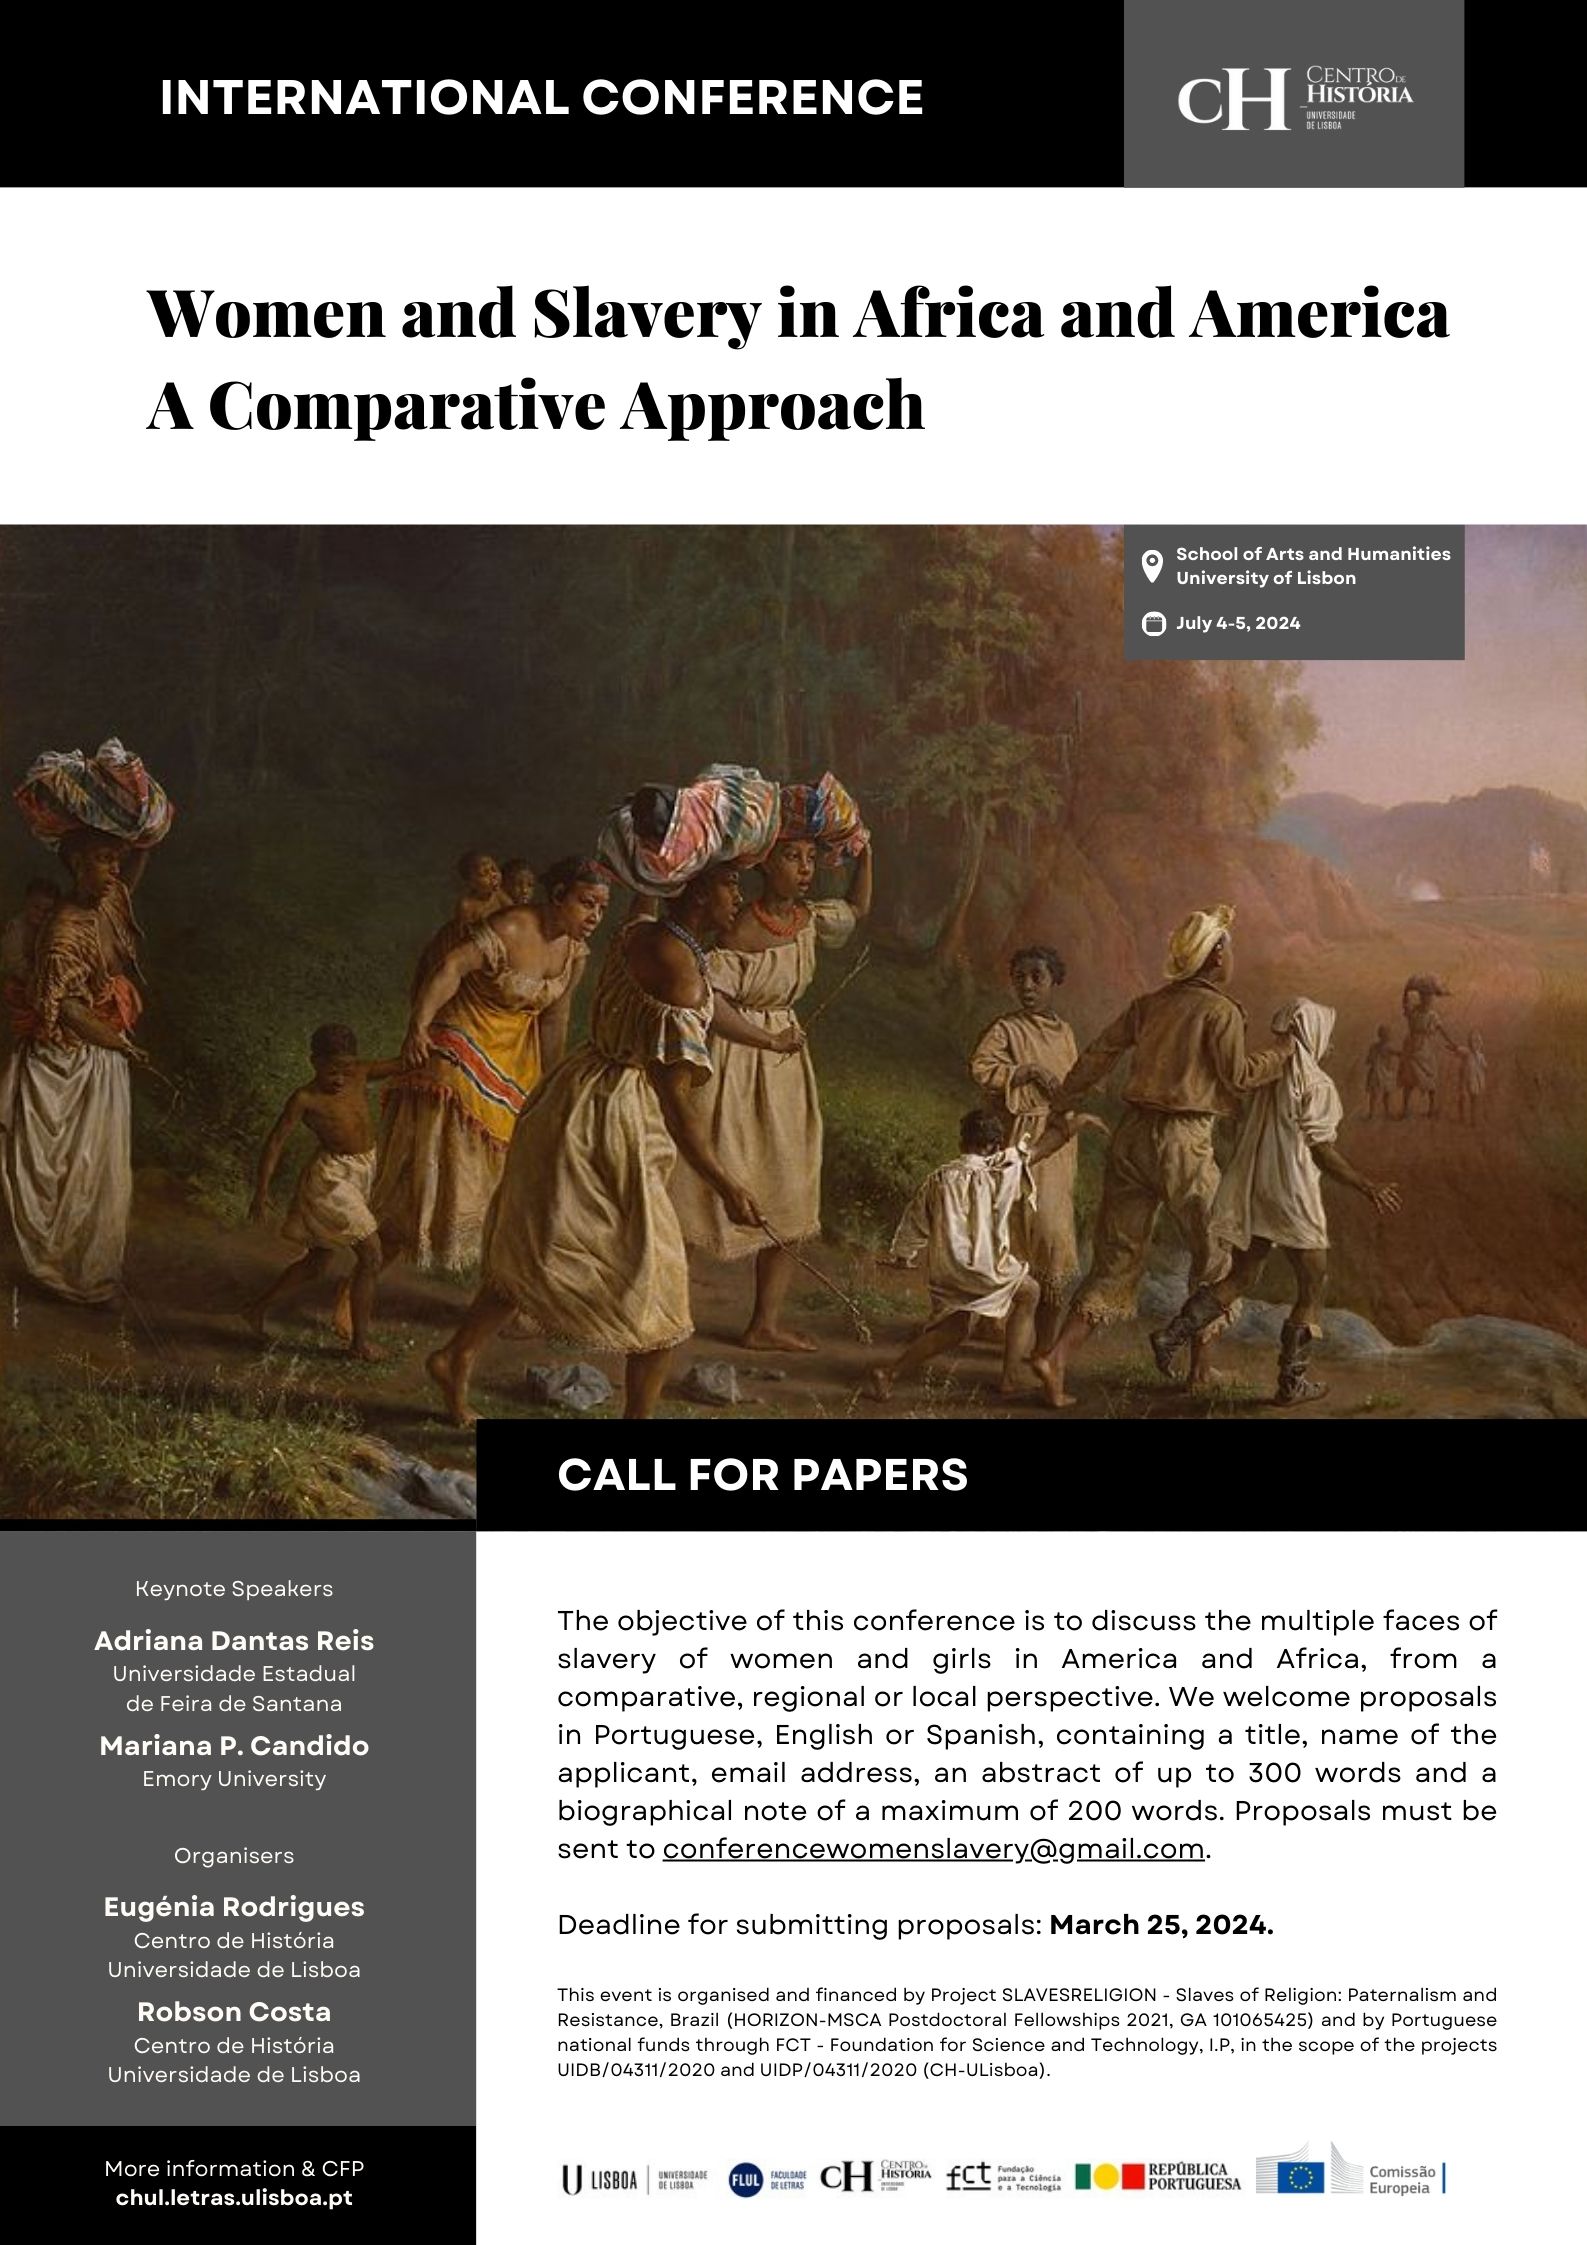 International Conference Women and Slavery in Africa and America: A Comparative Approach